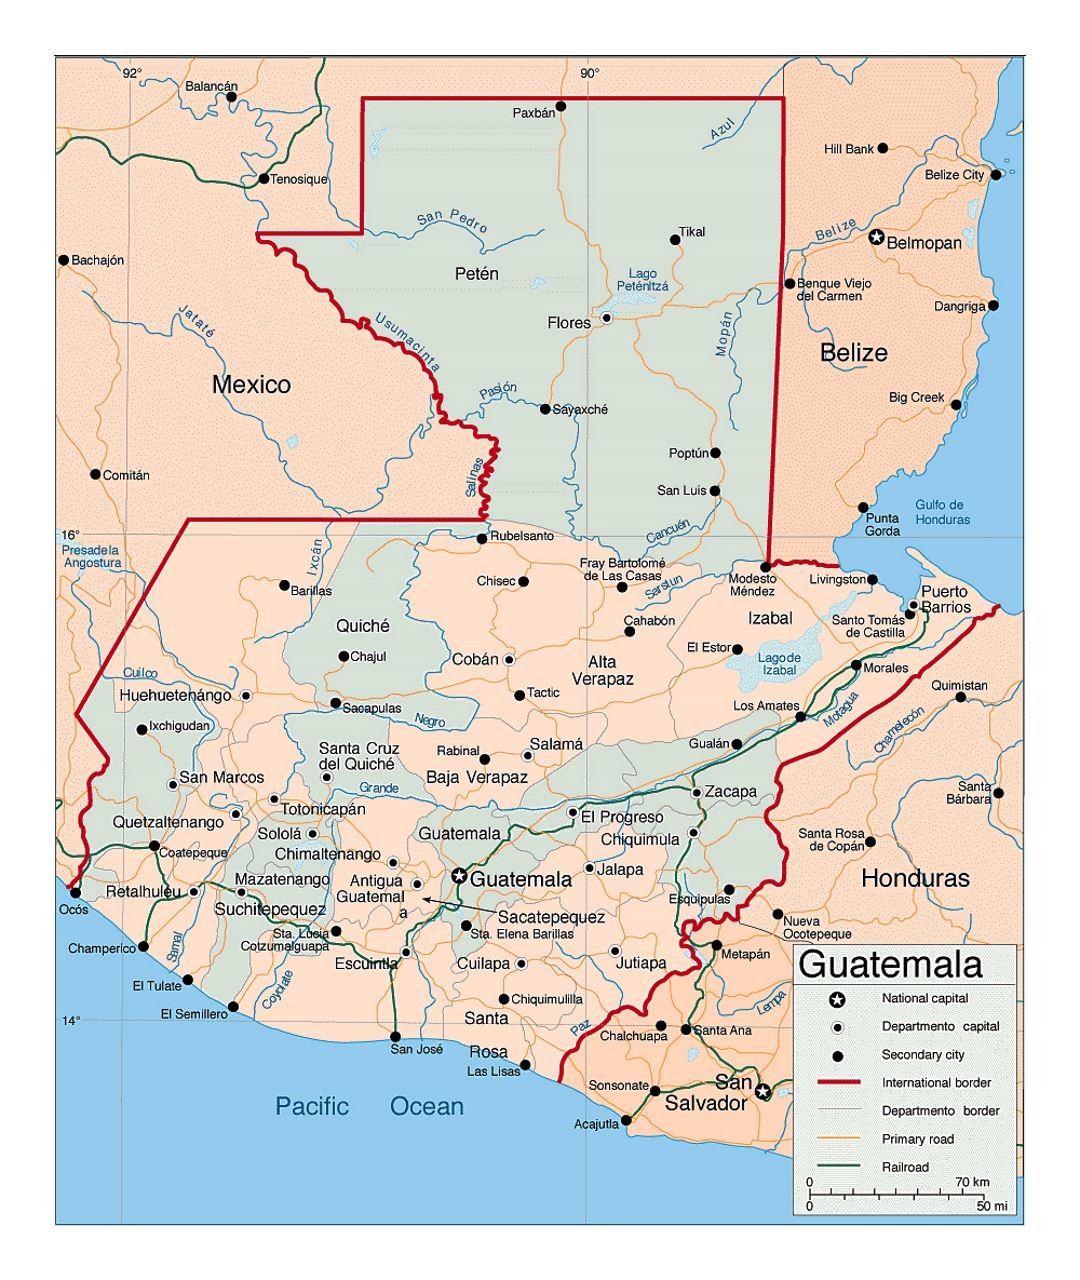 Detailed political and administrative map of Guatemala with roads, railroads and cities